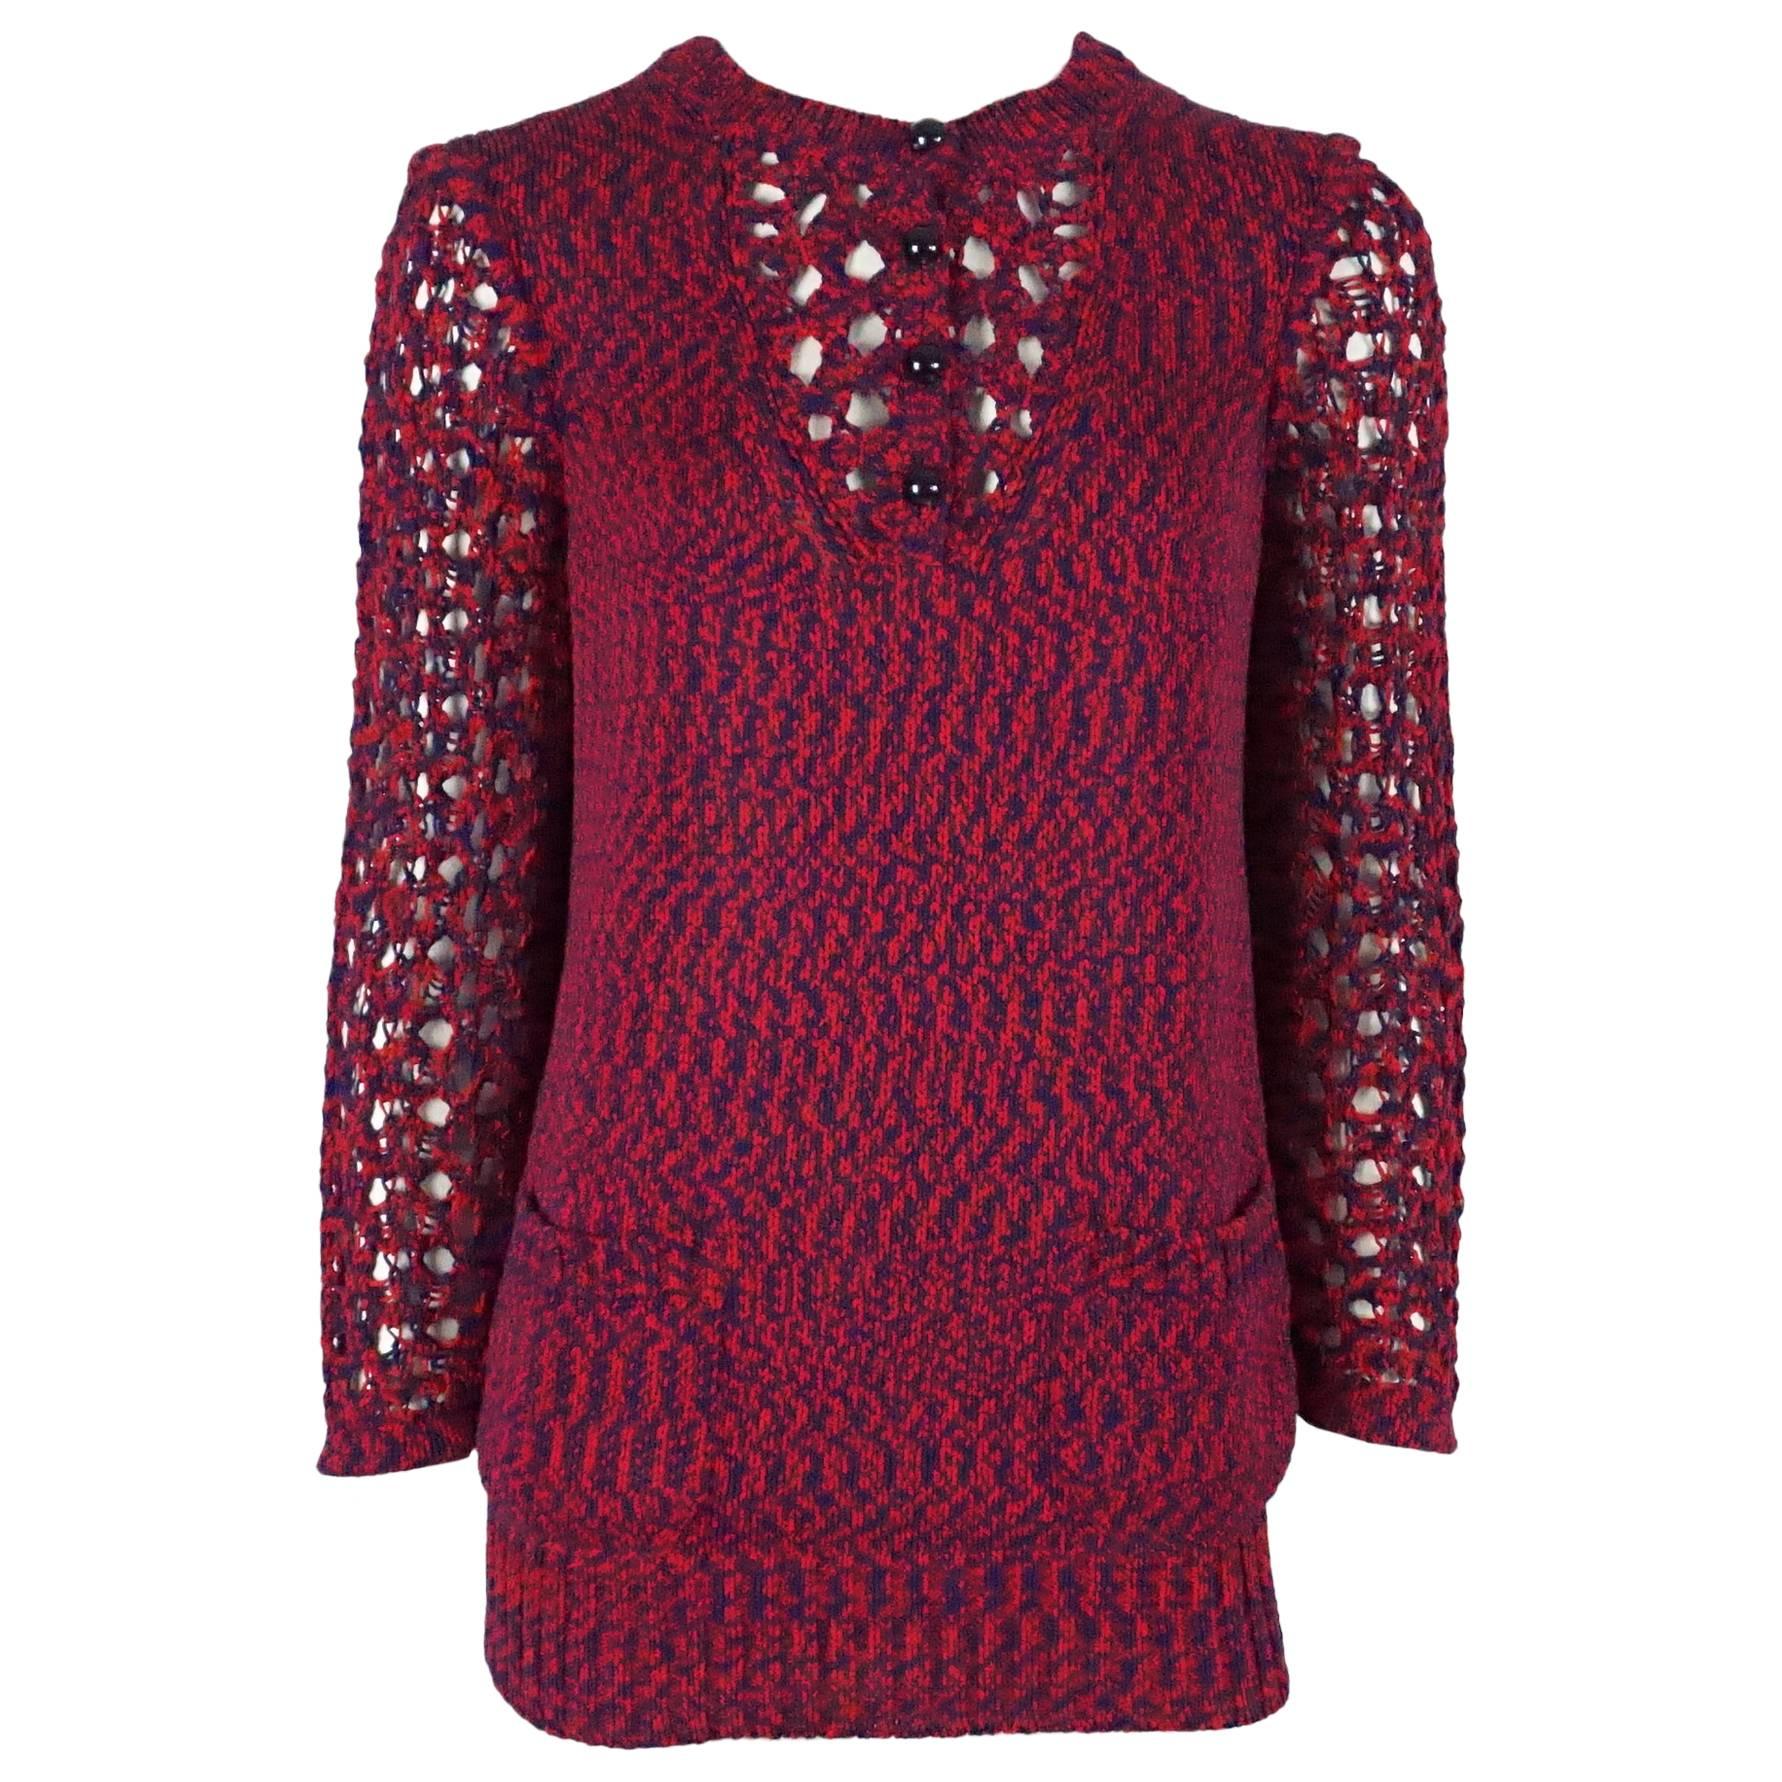 Chanel Runway Spring 2014 Red and Blue Cotton Knit Crochet Sweater - Size 40